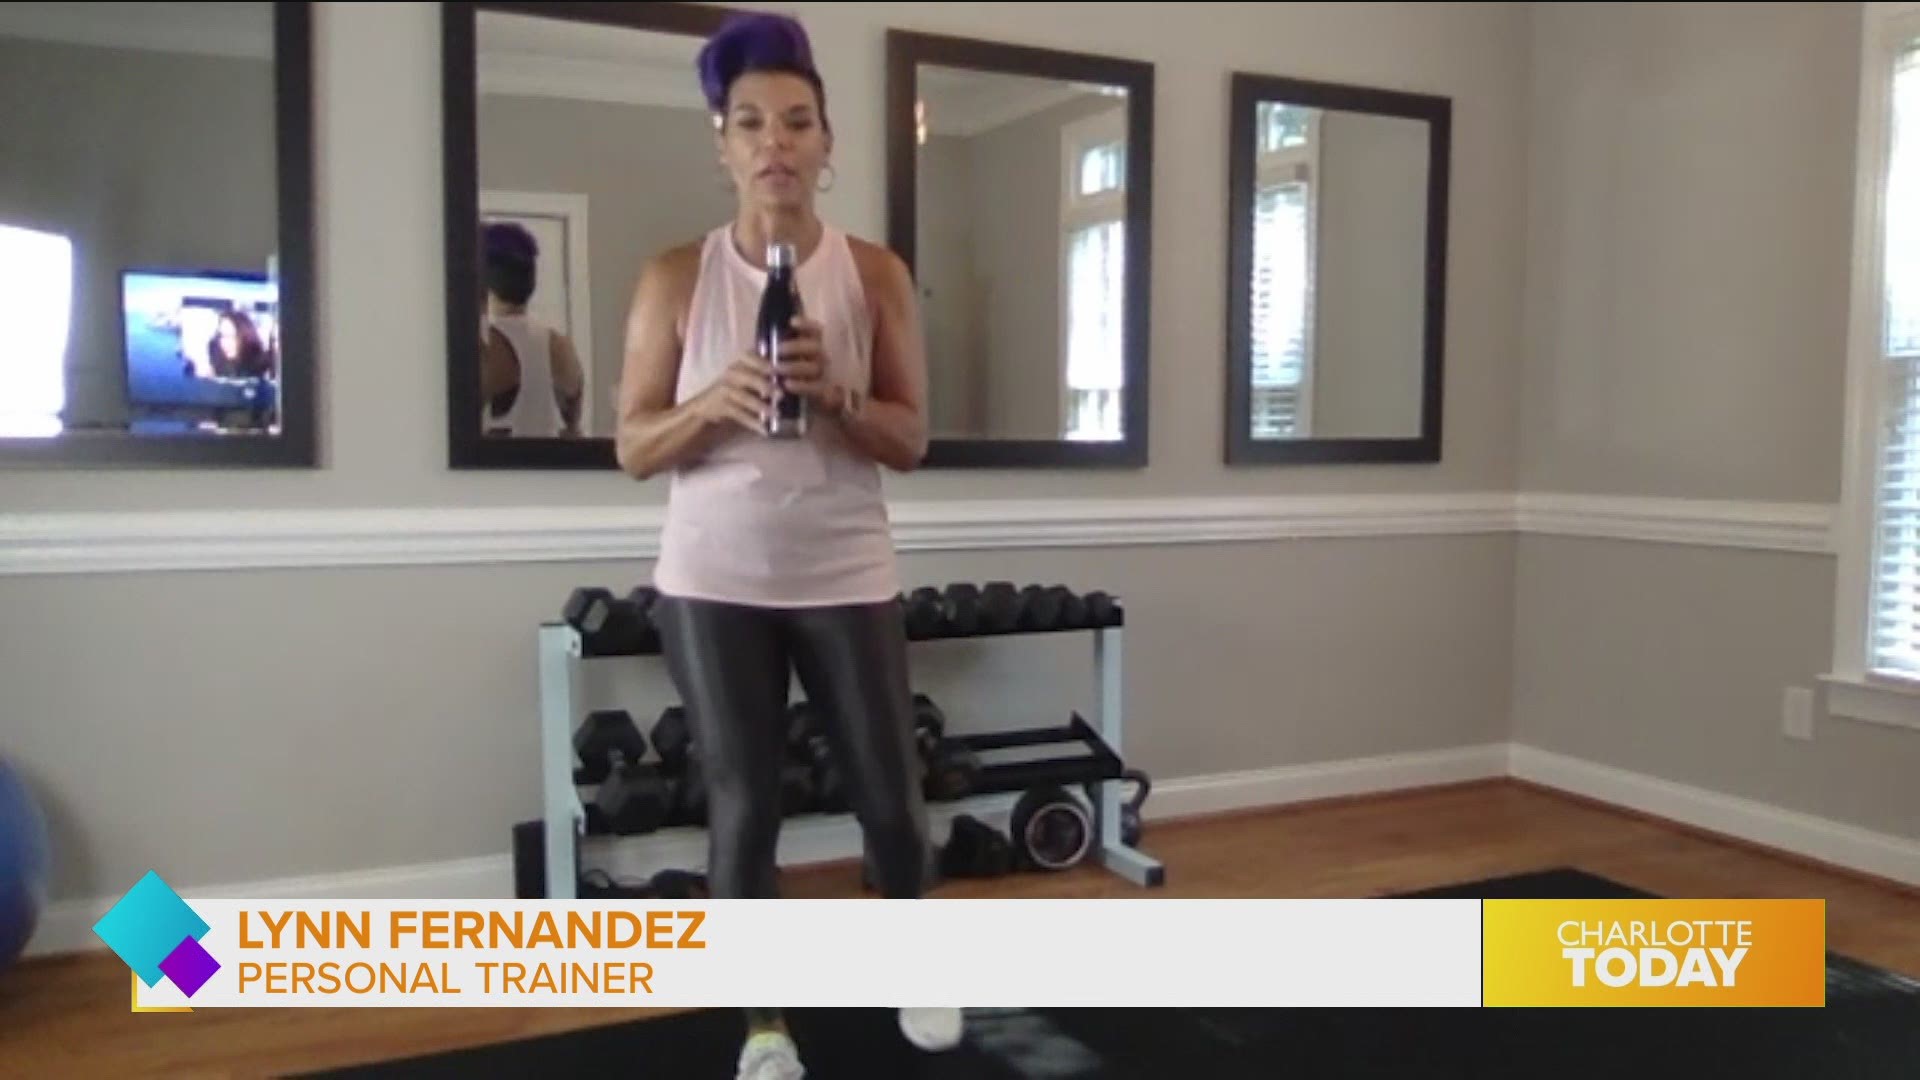 Trainer Lynn Fernandez has simple workout you can do at home using only water bottles.